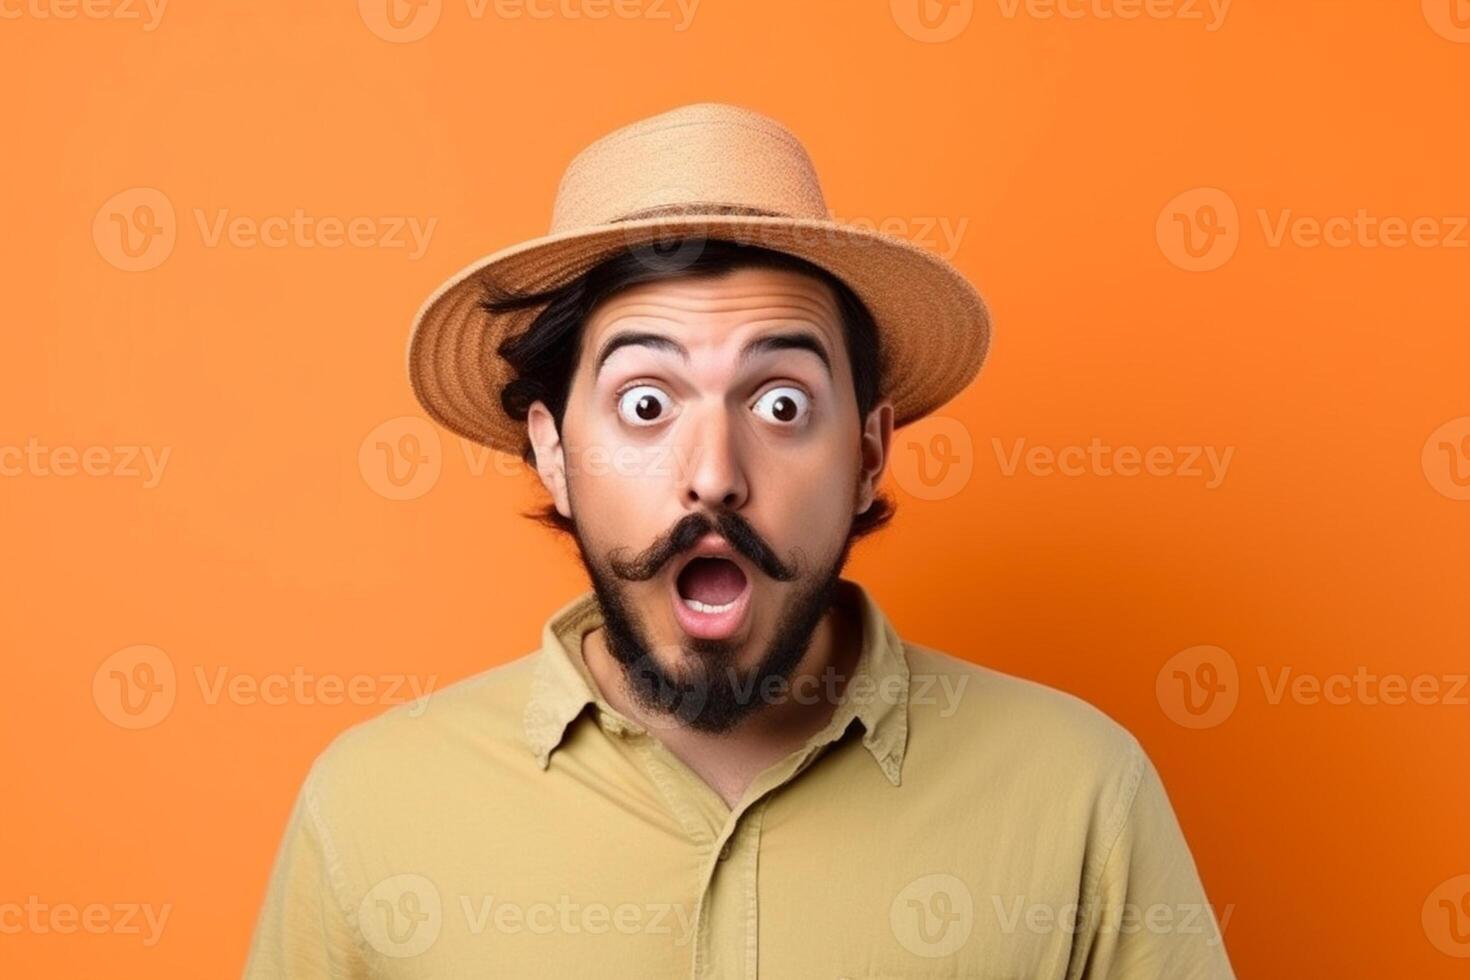 a man on solid color background photoshoot with Surprise facial expression photo